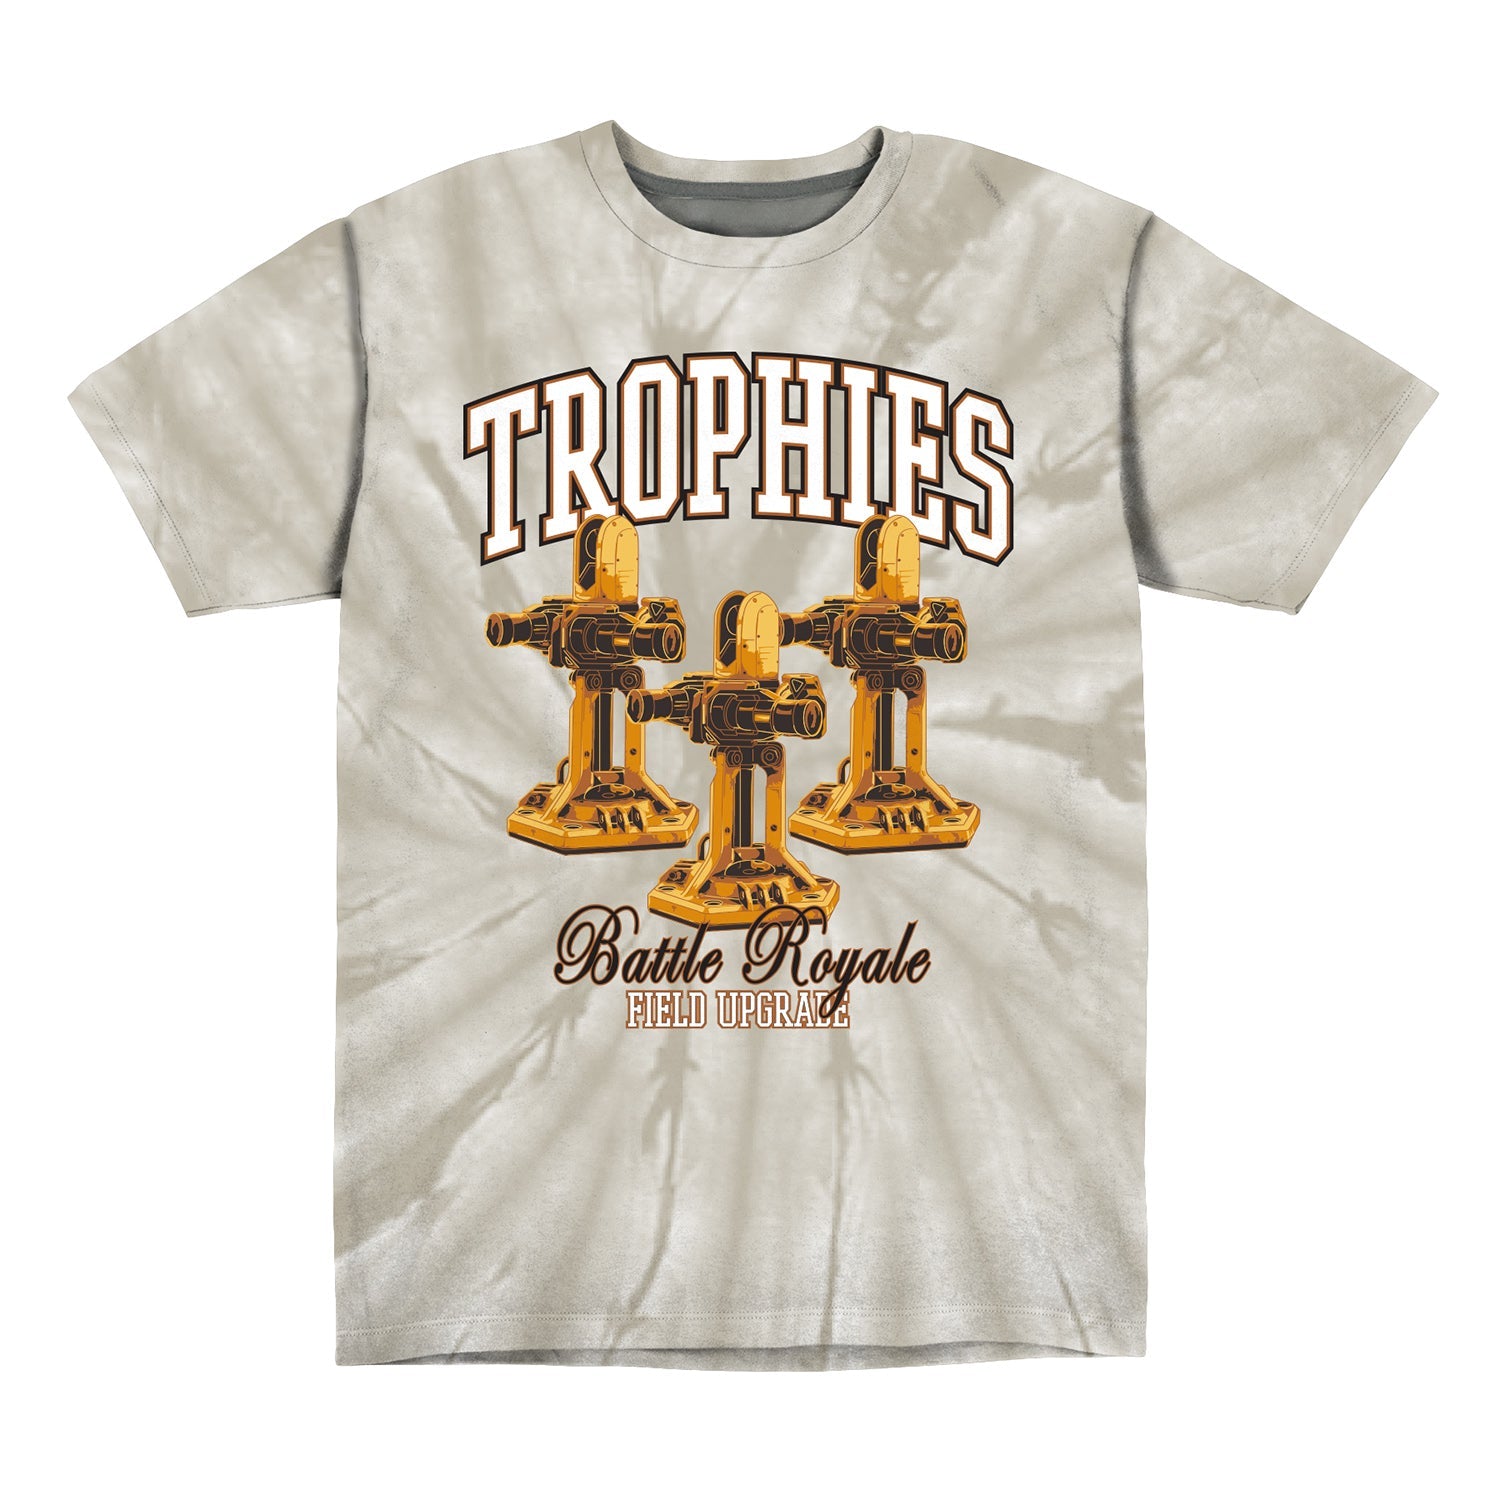 Call of Duty Grey Tie-Dye Trophies T-Shirt - Front View